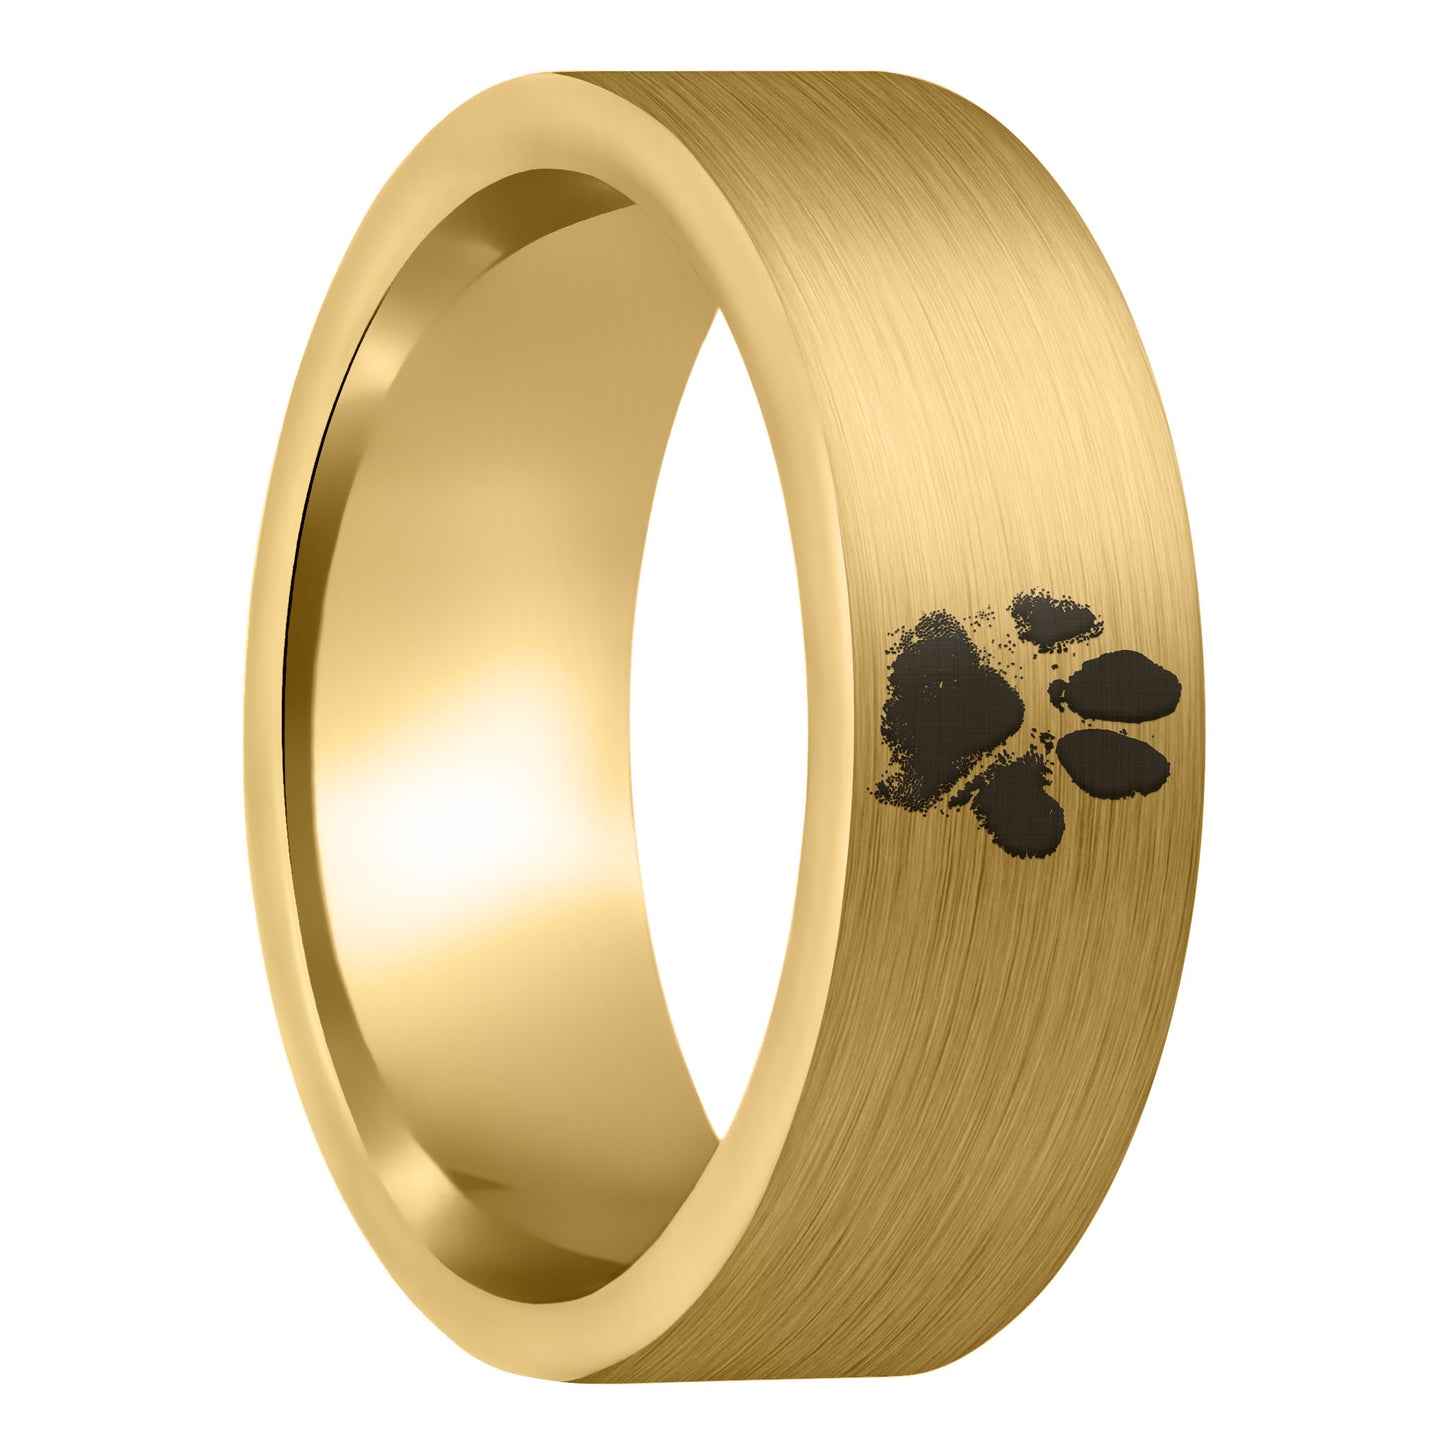 A custom paw print brushed gold tungsten men's wedding band displayed on a plain white background.